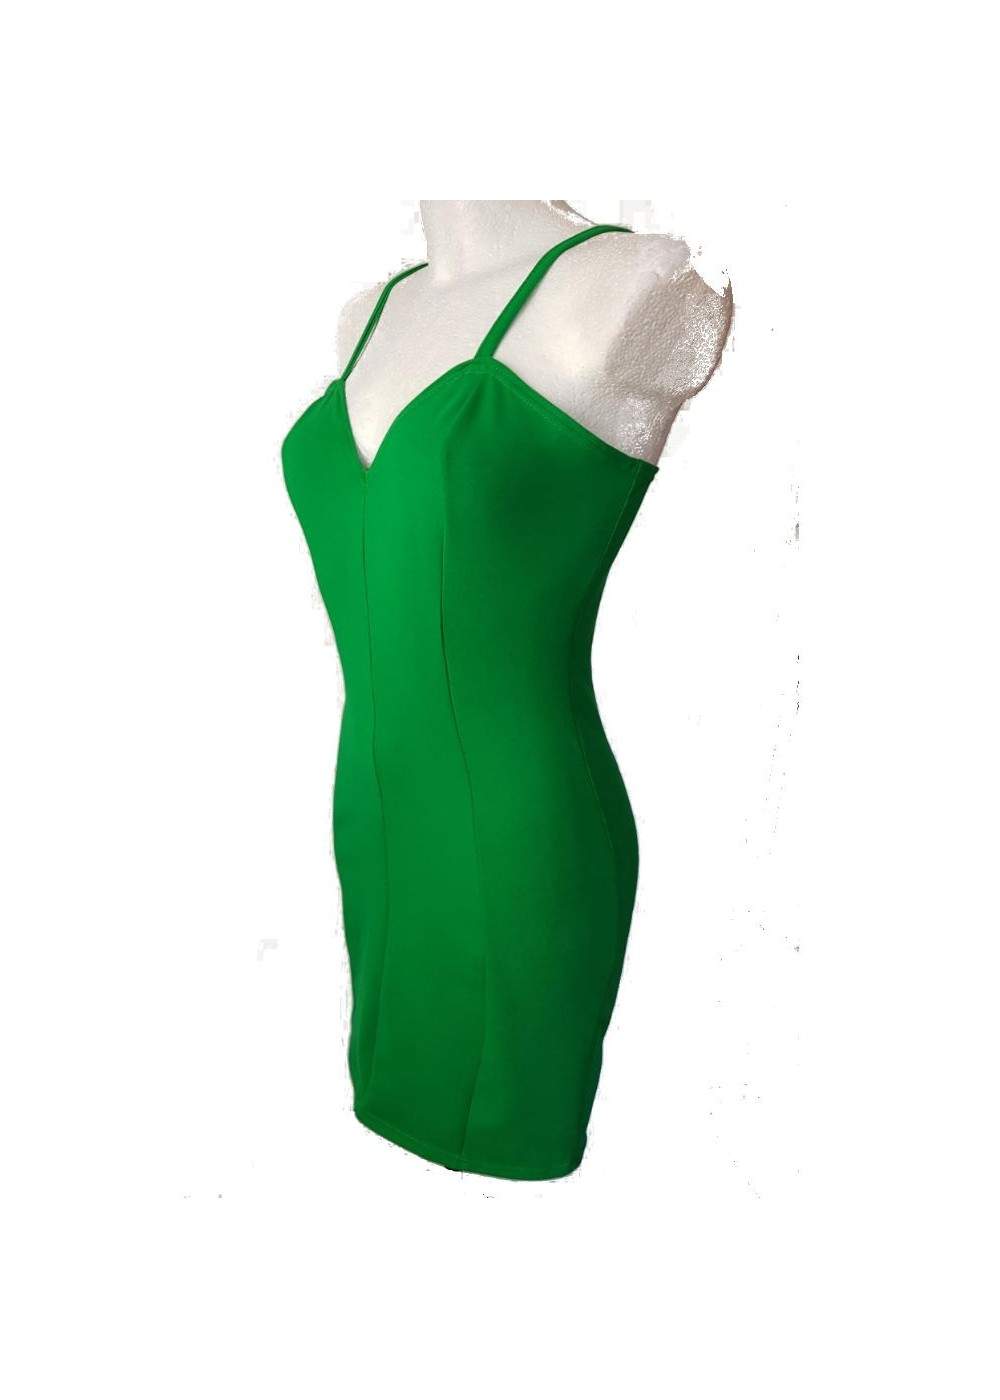 Save 15 percent on Green Stretch Cotton Strap Dress CockPart Dress ... - 